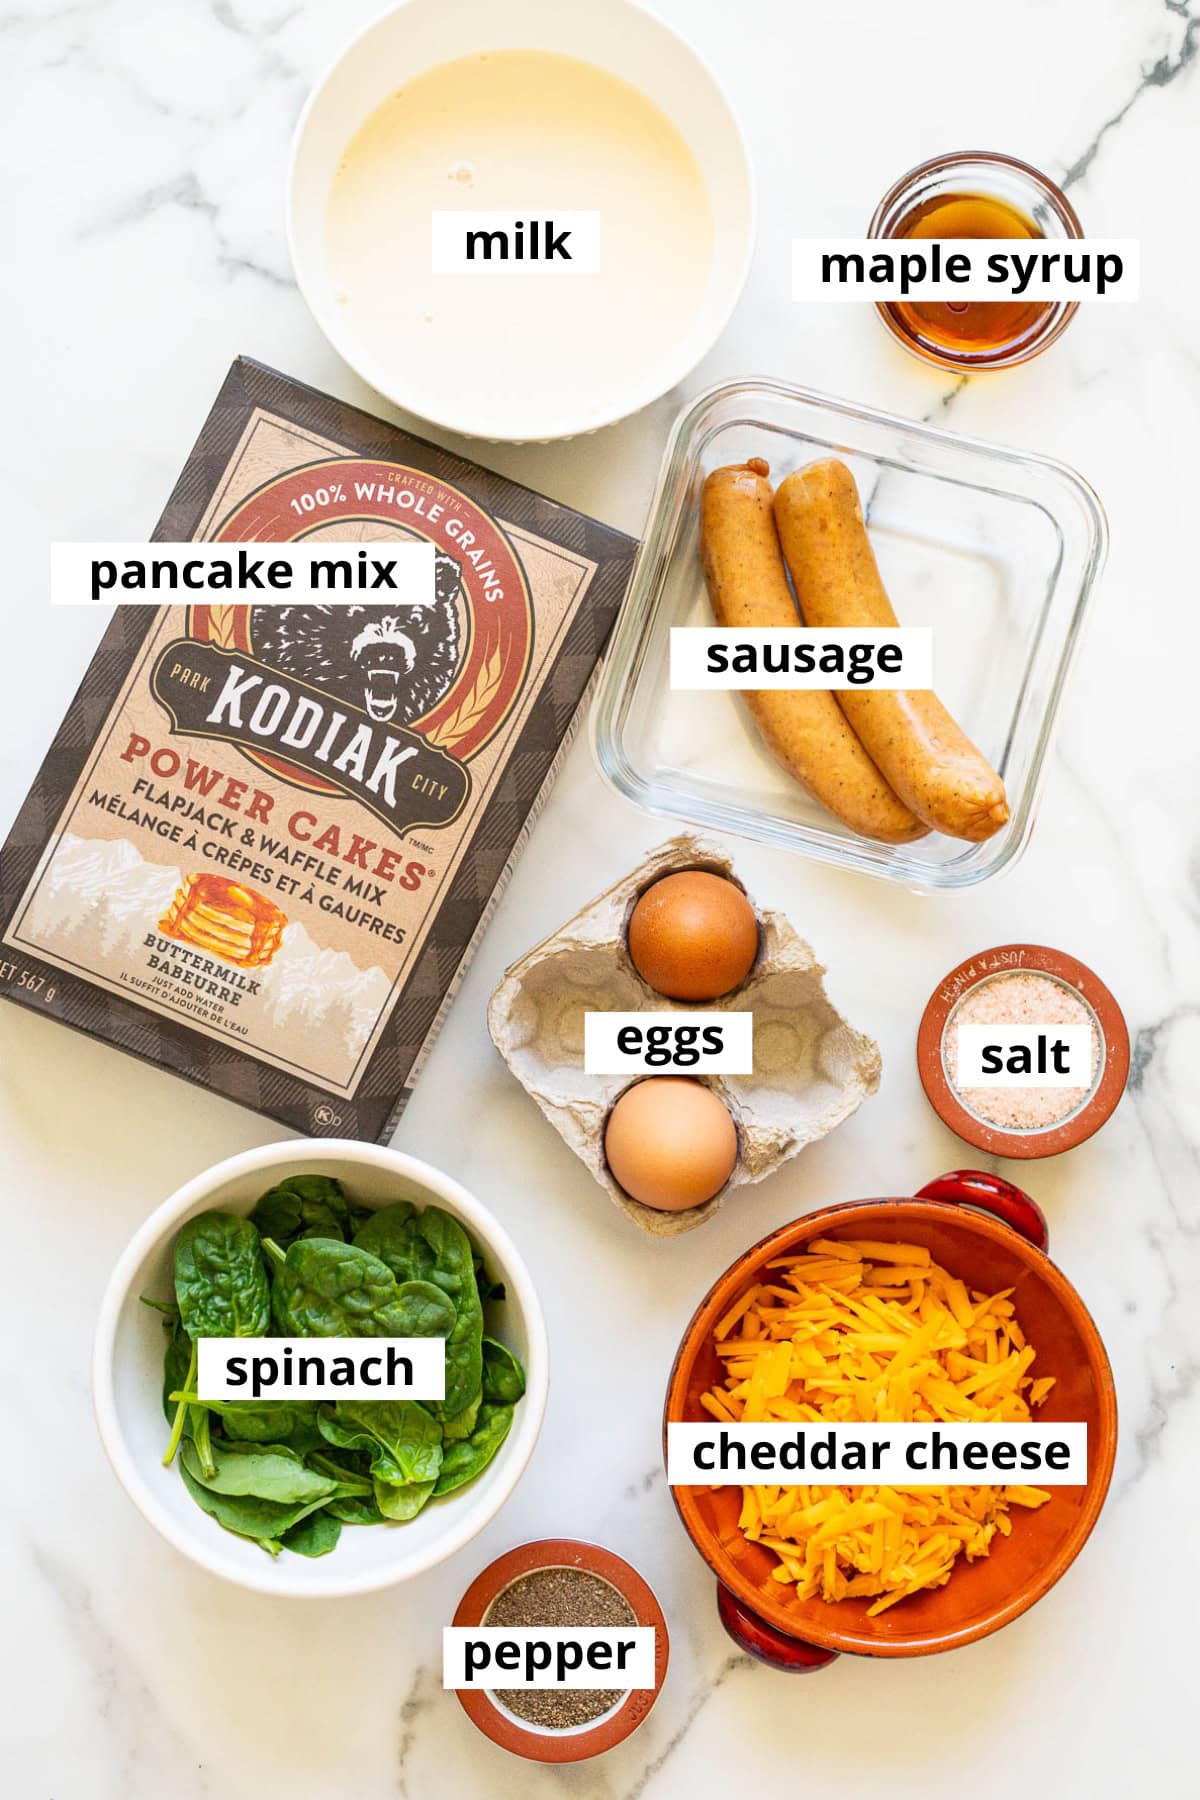 Eggs, pancake mix, sausage, milk, maple syrup, spinach, cheese, salt, pepper.